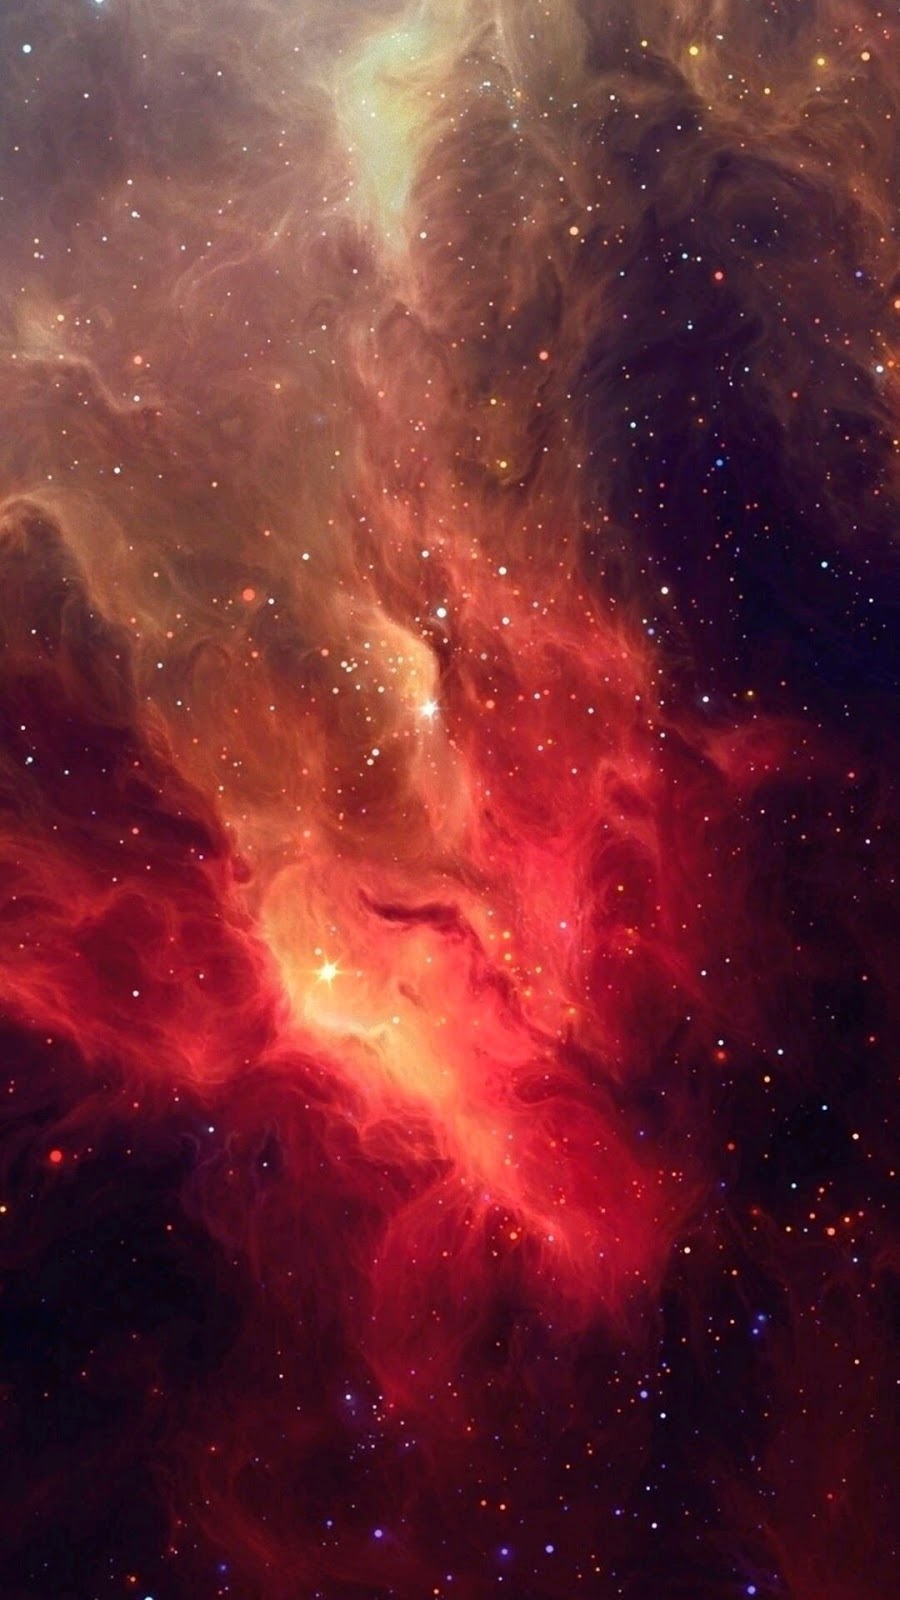 Space Abstraction Wallpaper Amazing - DDWallpaper